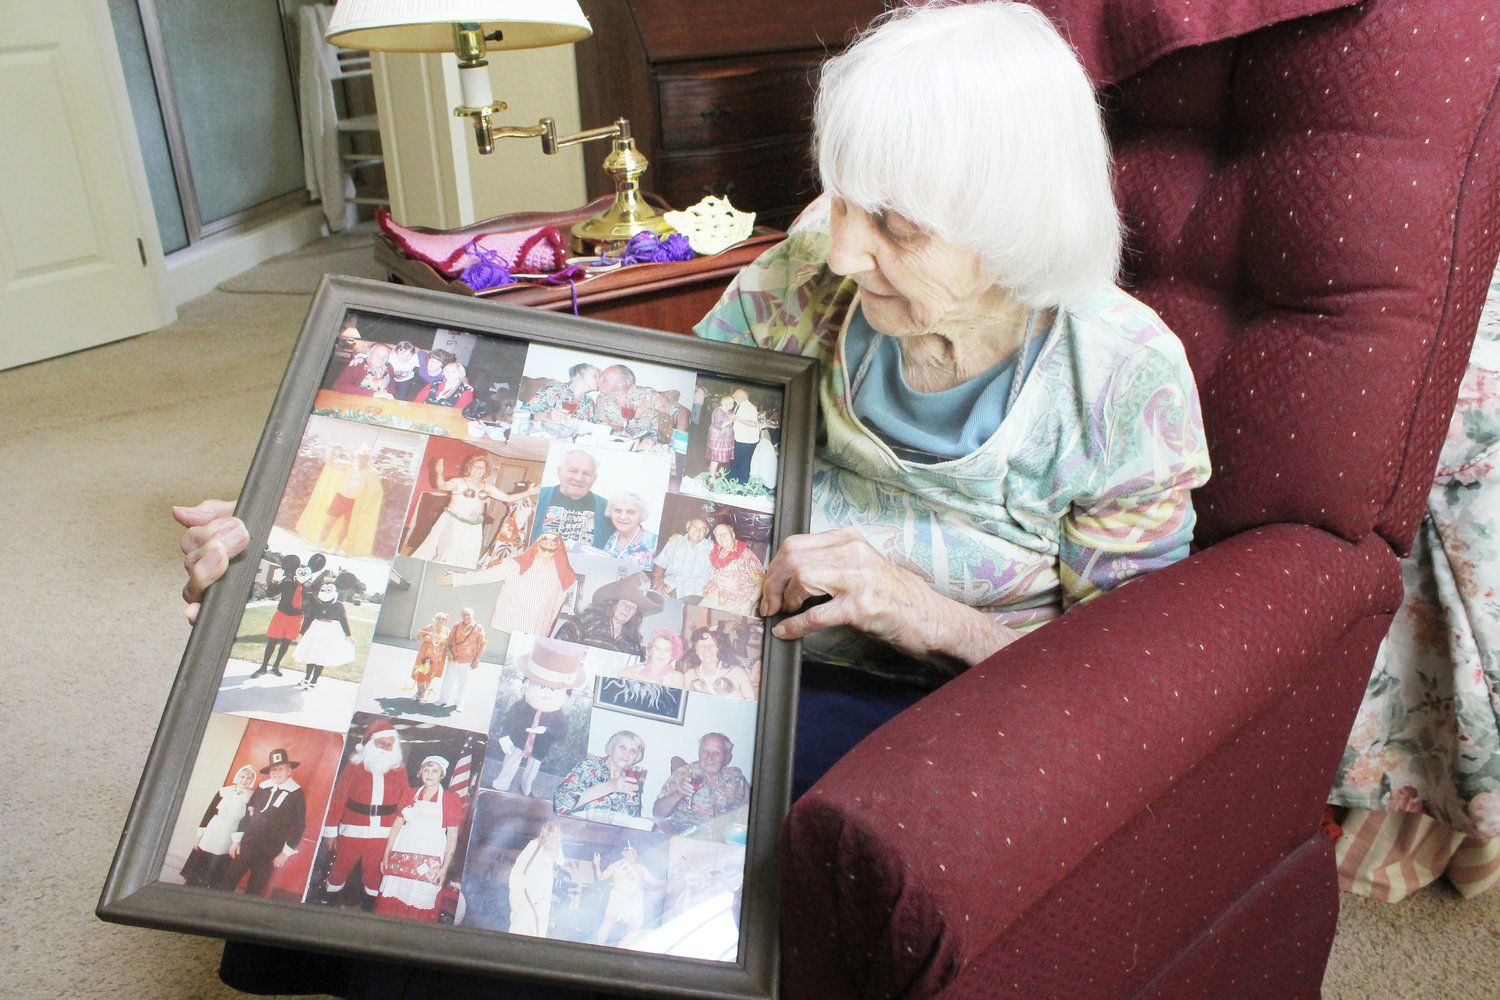 This framed collage displays glimpses of the Mineola 102 year old’s very full life. (Monitor photo by Doris Newman)